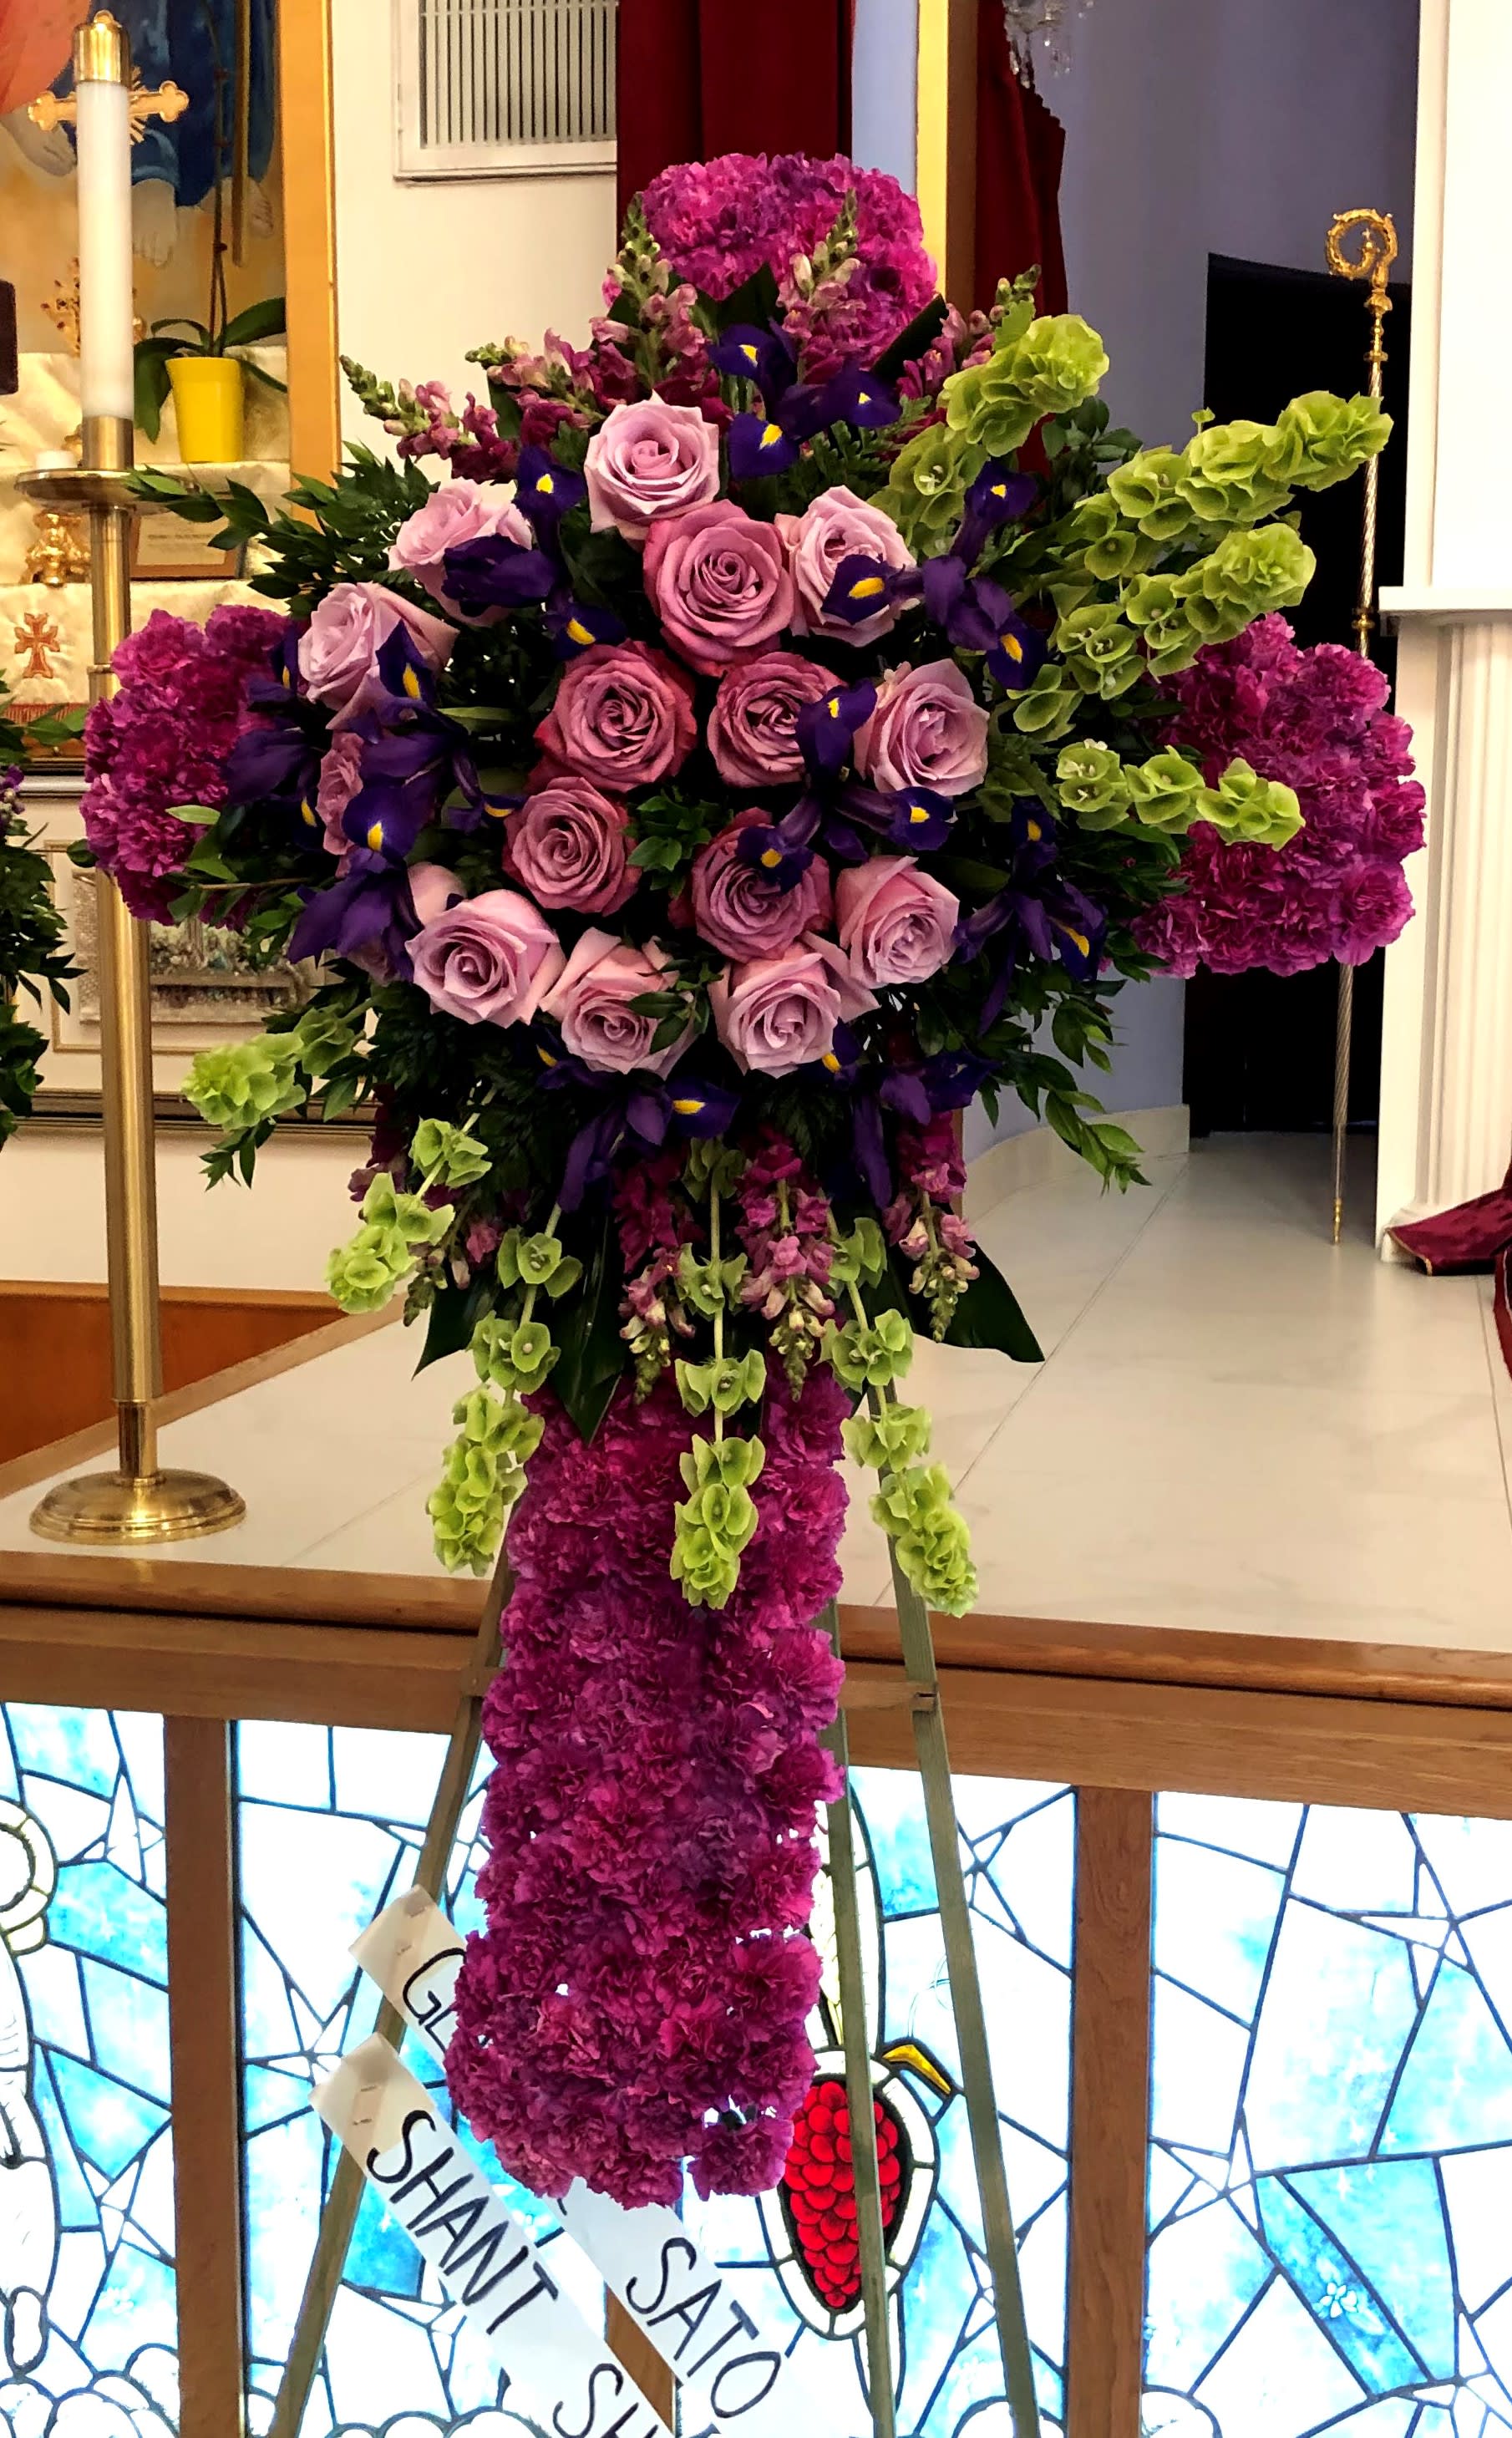 Purple Bliss - Pasadena Flowers - An Purple theme tribute, this purple cross funeral spray is pure and tranquil. Featuring a variety of purple themed flowers including Roses , this elegant easel compliments the beauty of life.